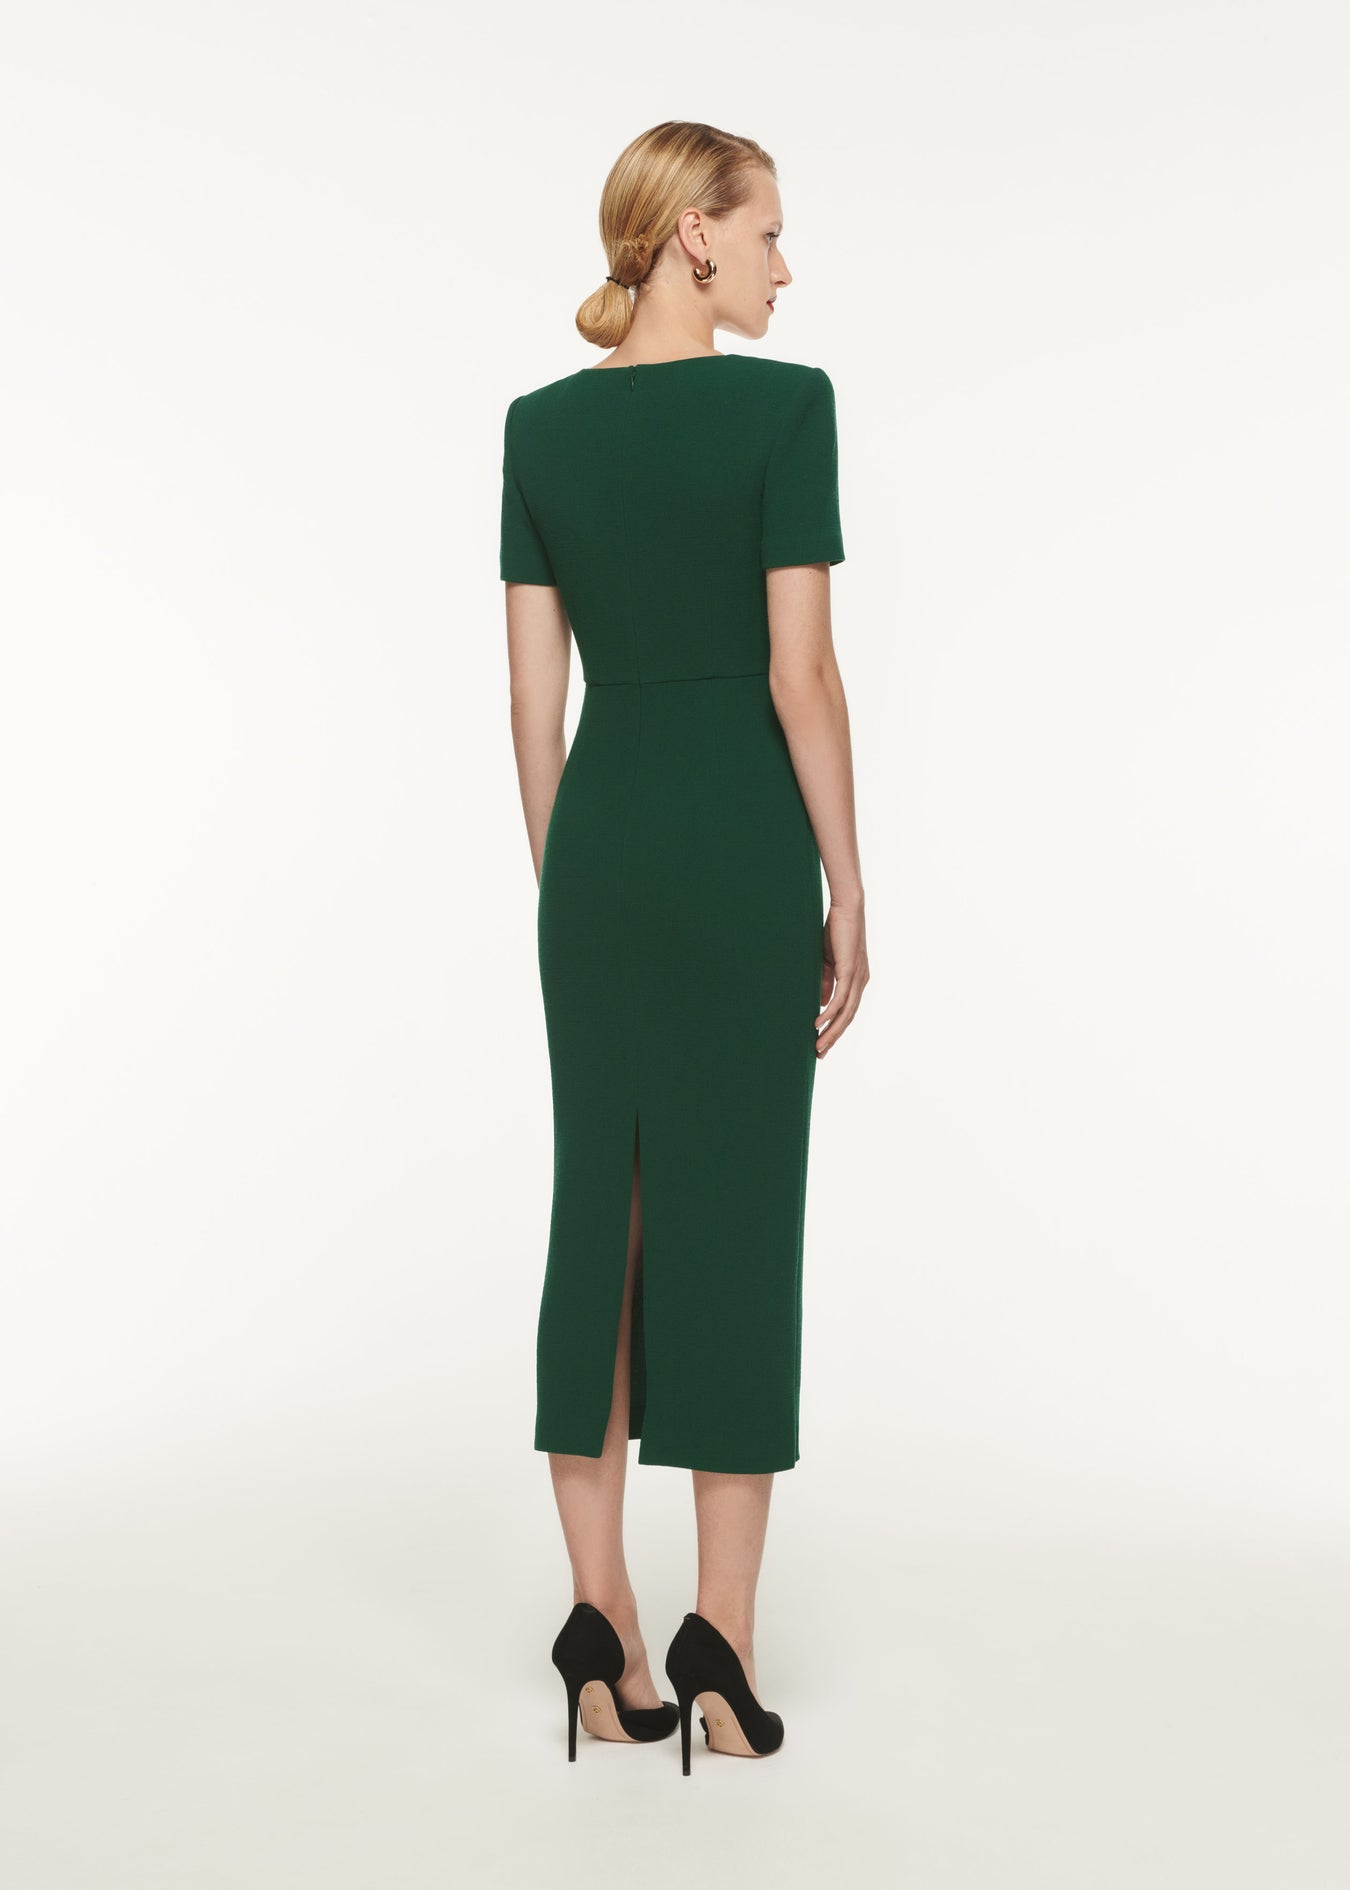 The back of a woman wearing the Short Sleeve Wool Crepe Midi Dress Green